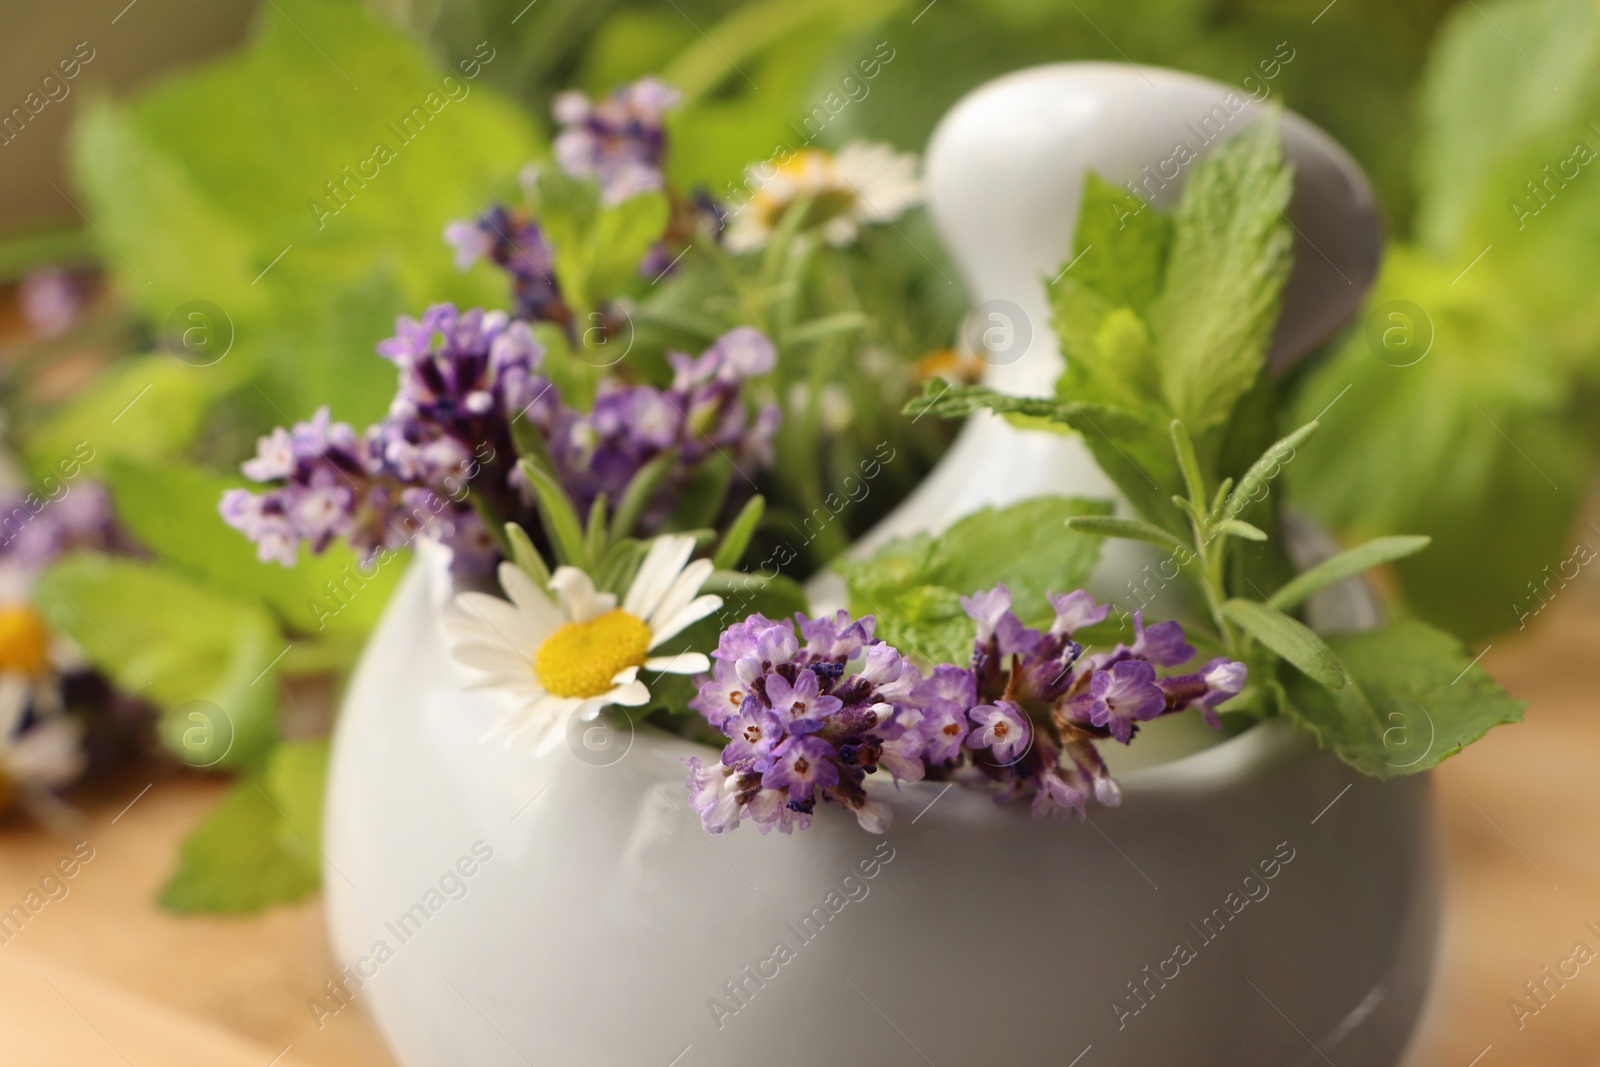 Photo of Mortar with fresh lavender, chamomile flowers, herbs and pestle on blurred background, closeup